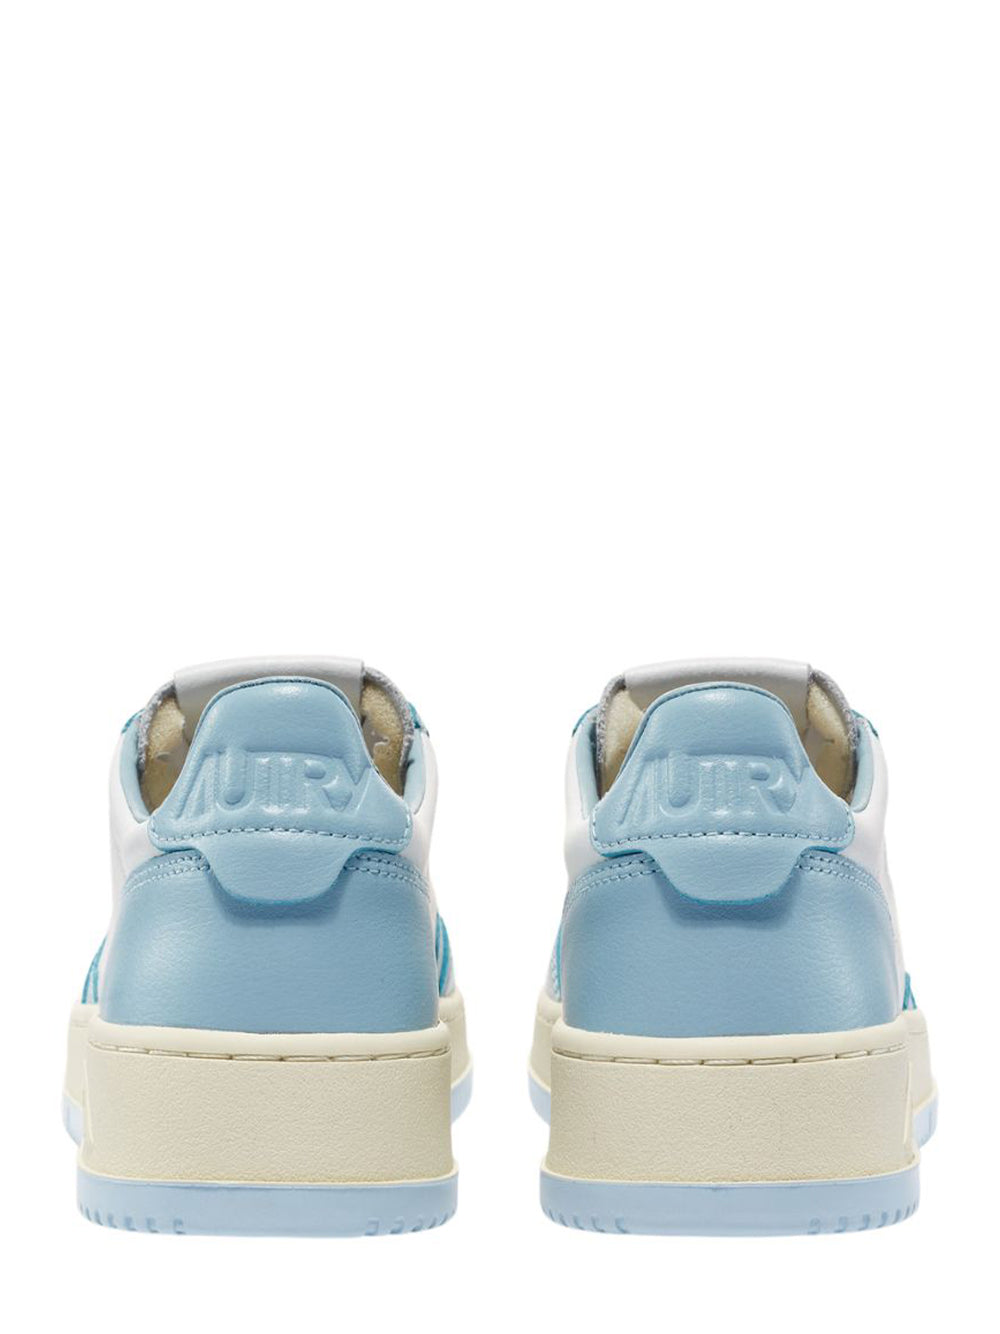 Medalist Low Bi-Color Leather Sneakers (White And Light Blue) (Women)